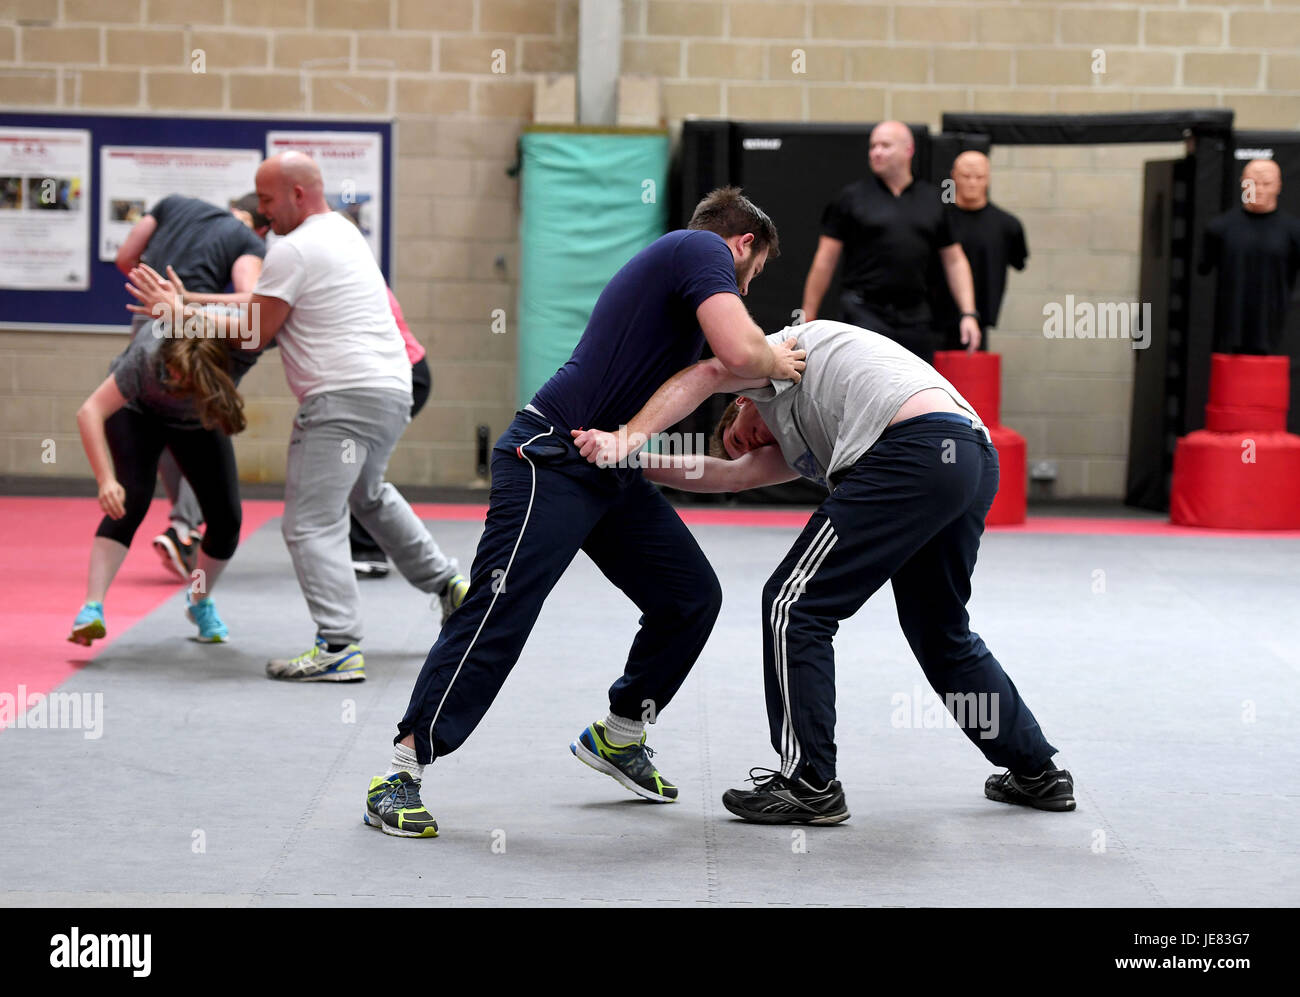 Police officers training in self defence. The focus of the event is to demonstrate the transparency around Dorset Police's use of force and the challenges involved, along with an overview of equipment and the skills that improve public and officer safety.  This comes ahead of the publication of use of force data by individual police forces nationally at the end of July. Officers during training Credit: Finnbarr Webster/Alamy Live News Stock Photo